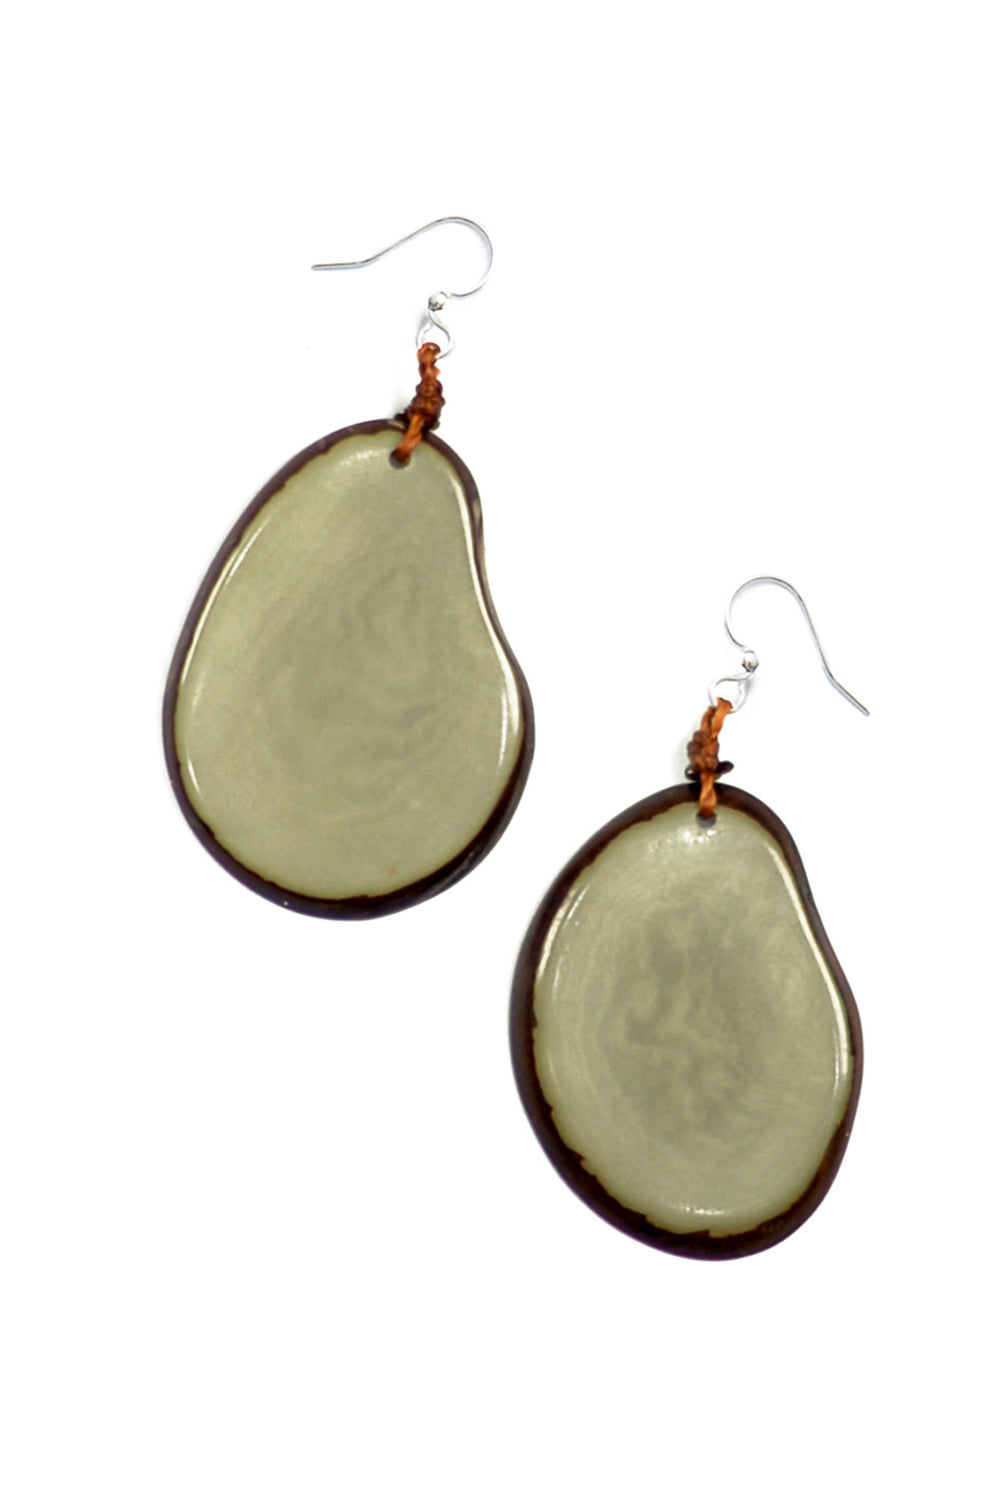 Organic Tague Jewelry (1E250) Drop earrings made from organic tagua nut slices in olive green